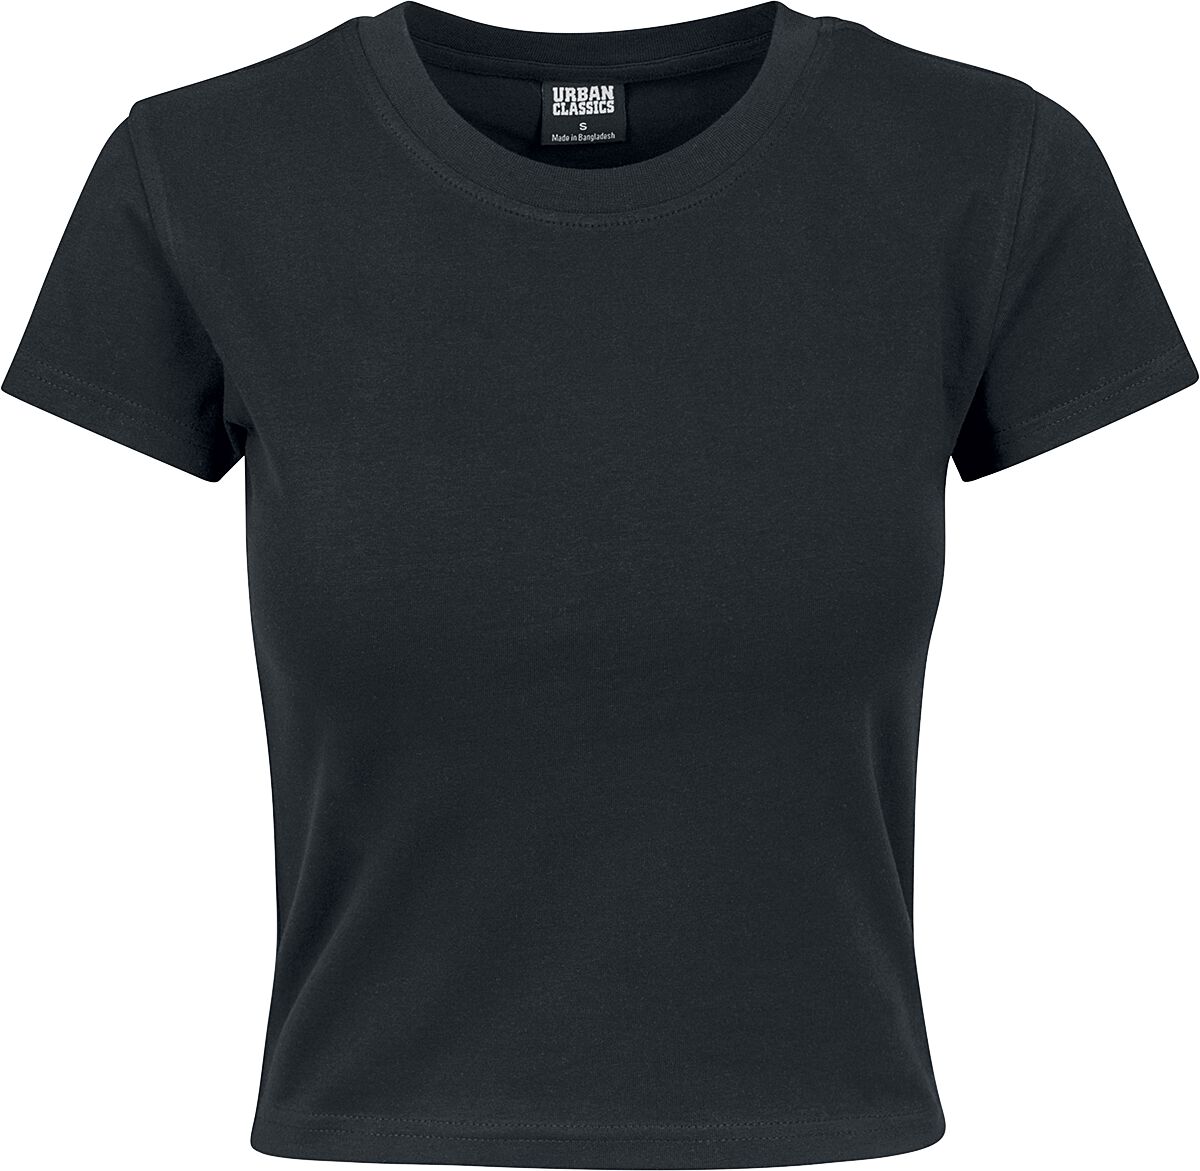 Image of T-Shirt di Urban Classics - Ladies Stretch Jersey Cropped Tee - XS a L - Donna - nero